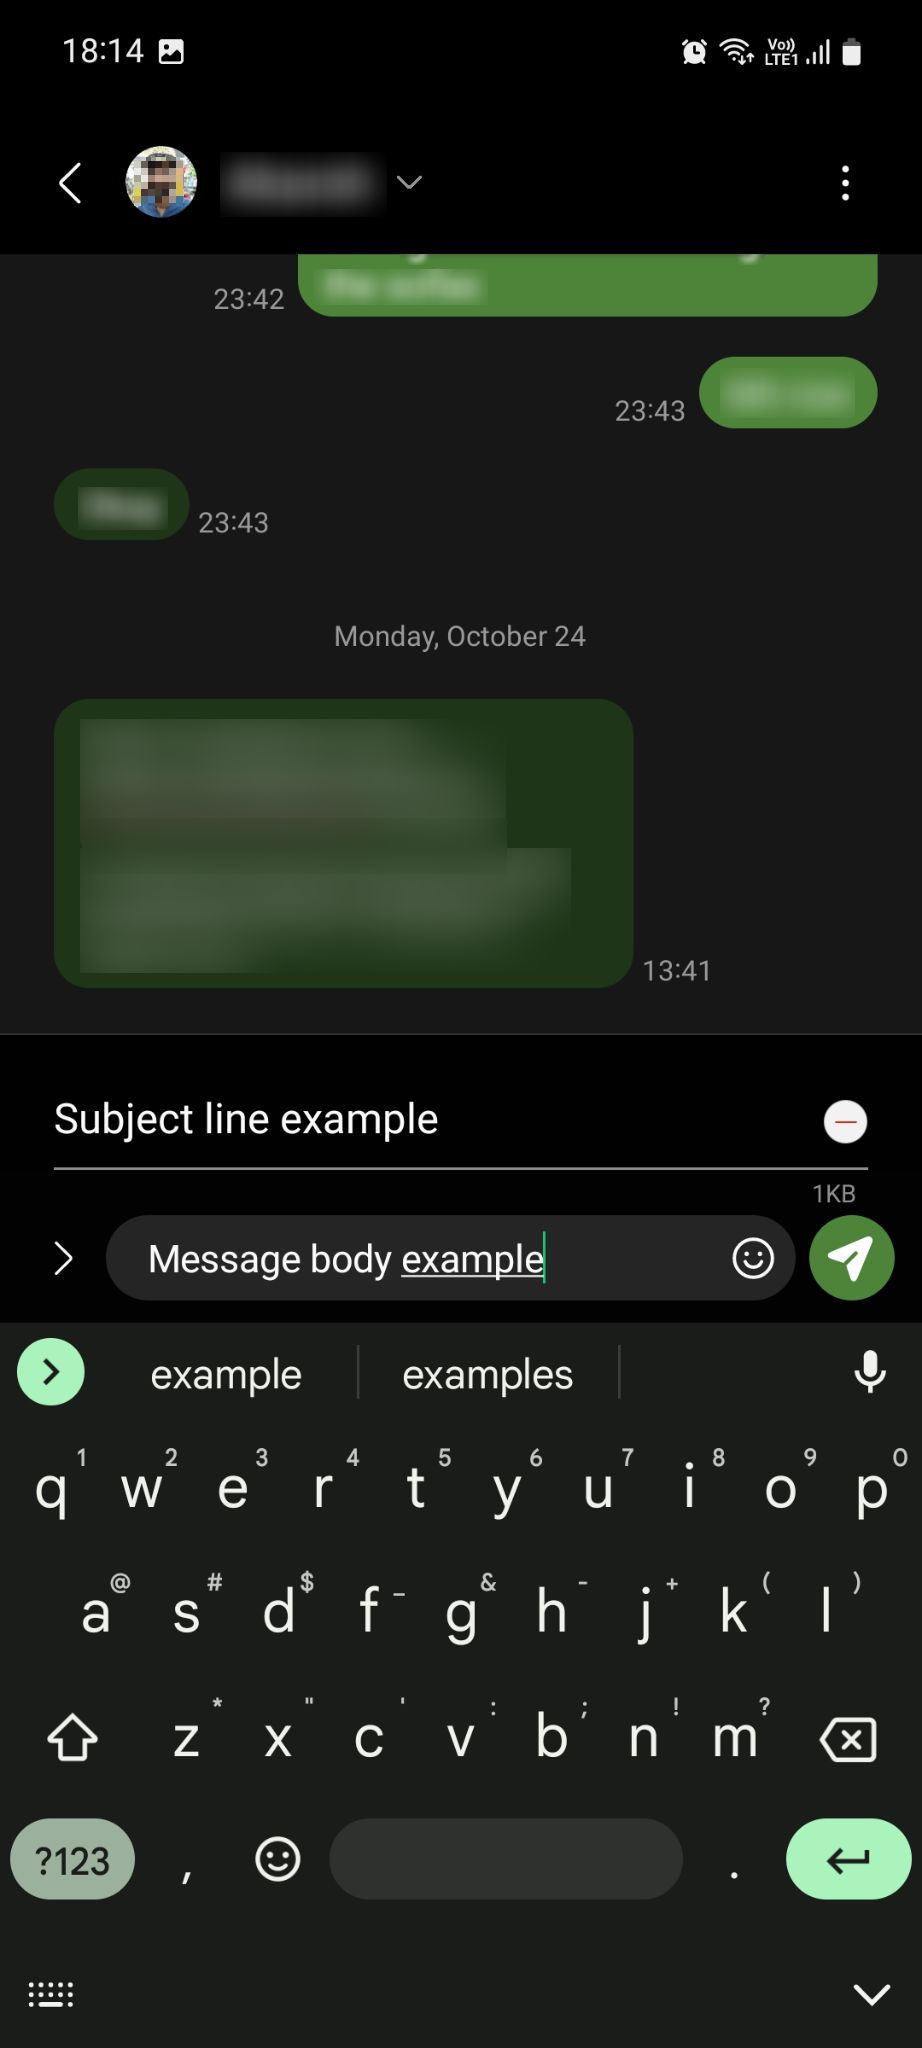 Samsung Messages adds a subject line to the message